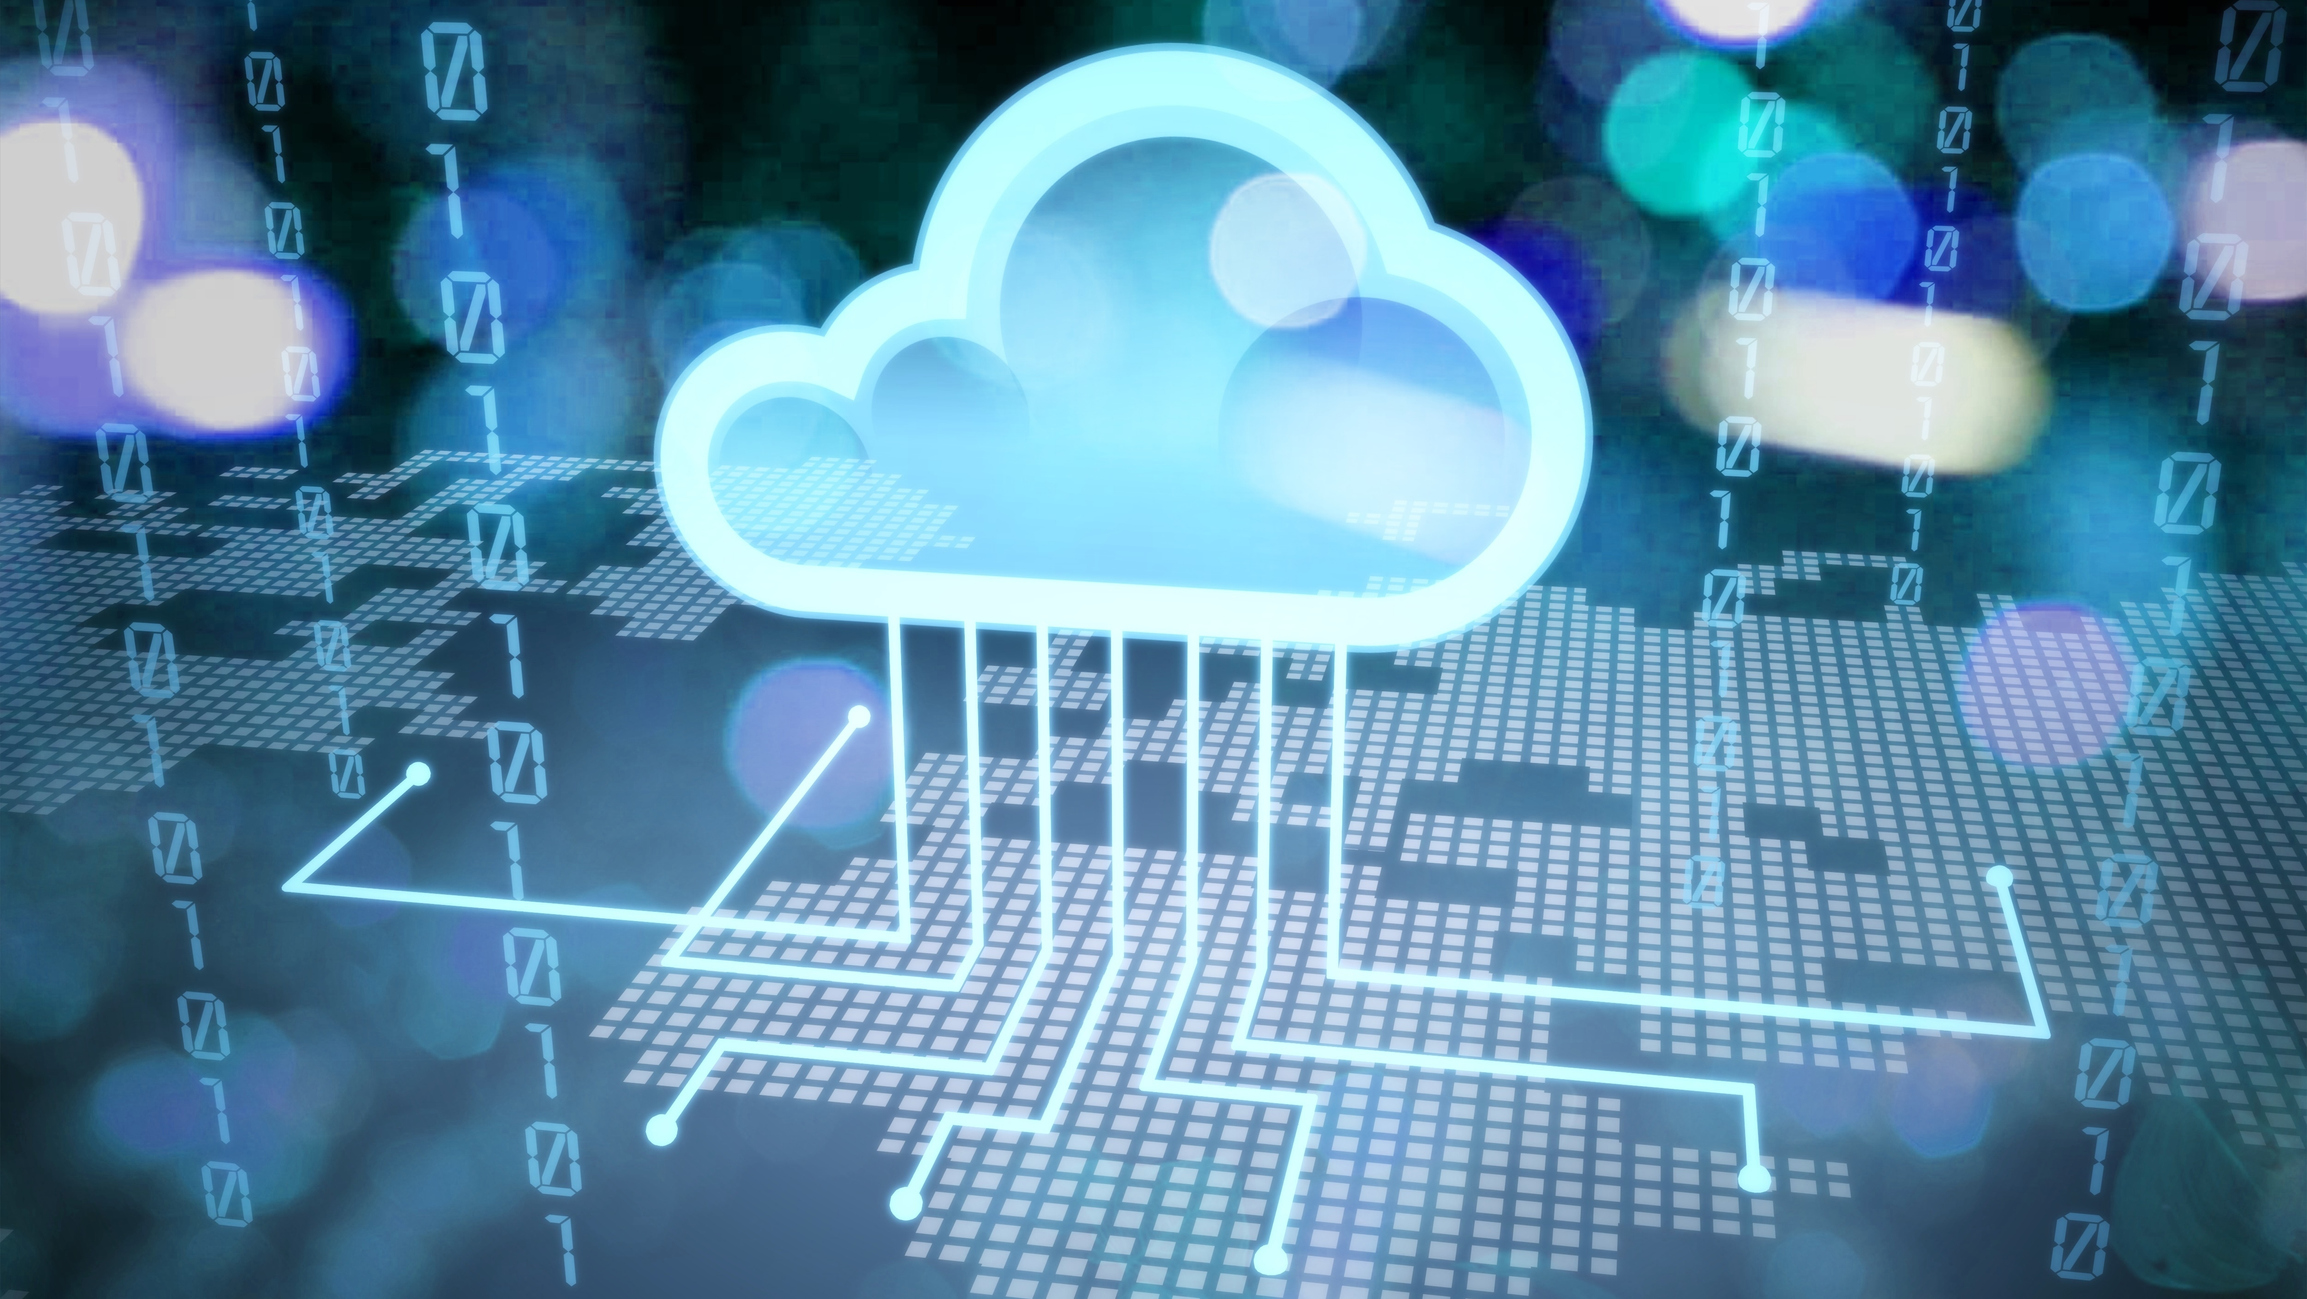  A blue cloud icon with lines resembling a circuit board in the background. The image represents the search query 'Reliability of cloud data storage'.